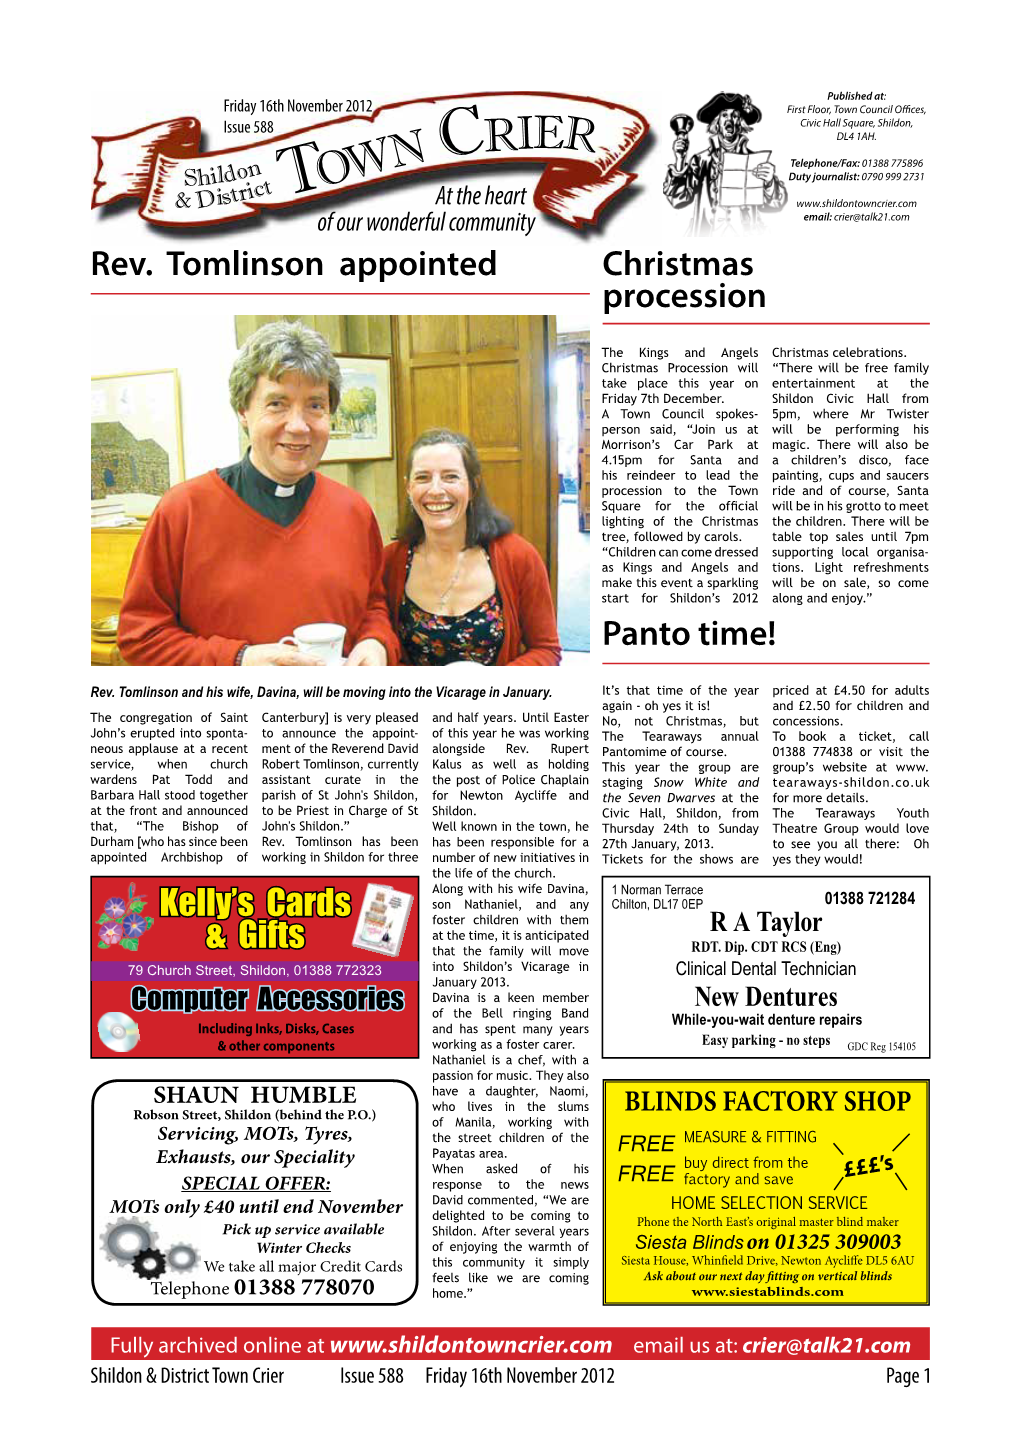 Town Crier Issue 588 Friday 16Th November 2012 Page 1 N Crier Shildon Ow Classifieds Istri C T & D T All About Local People